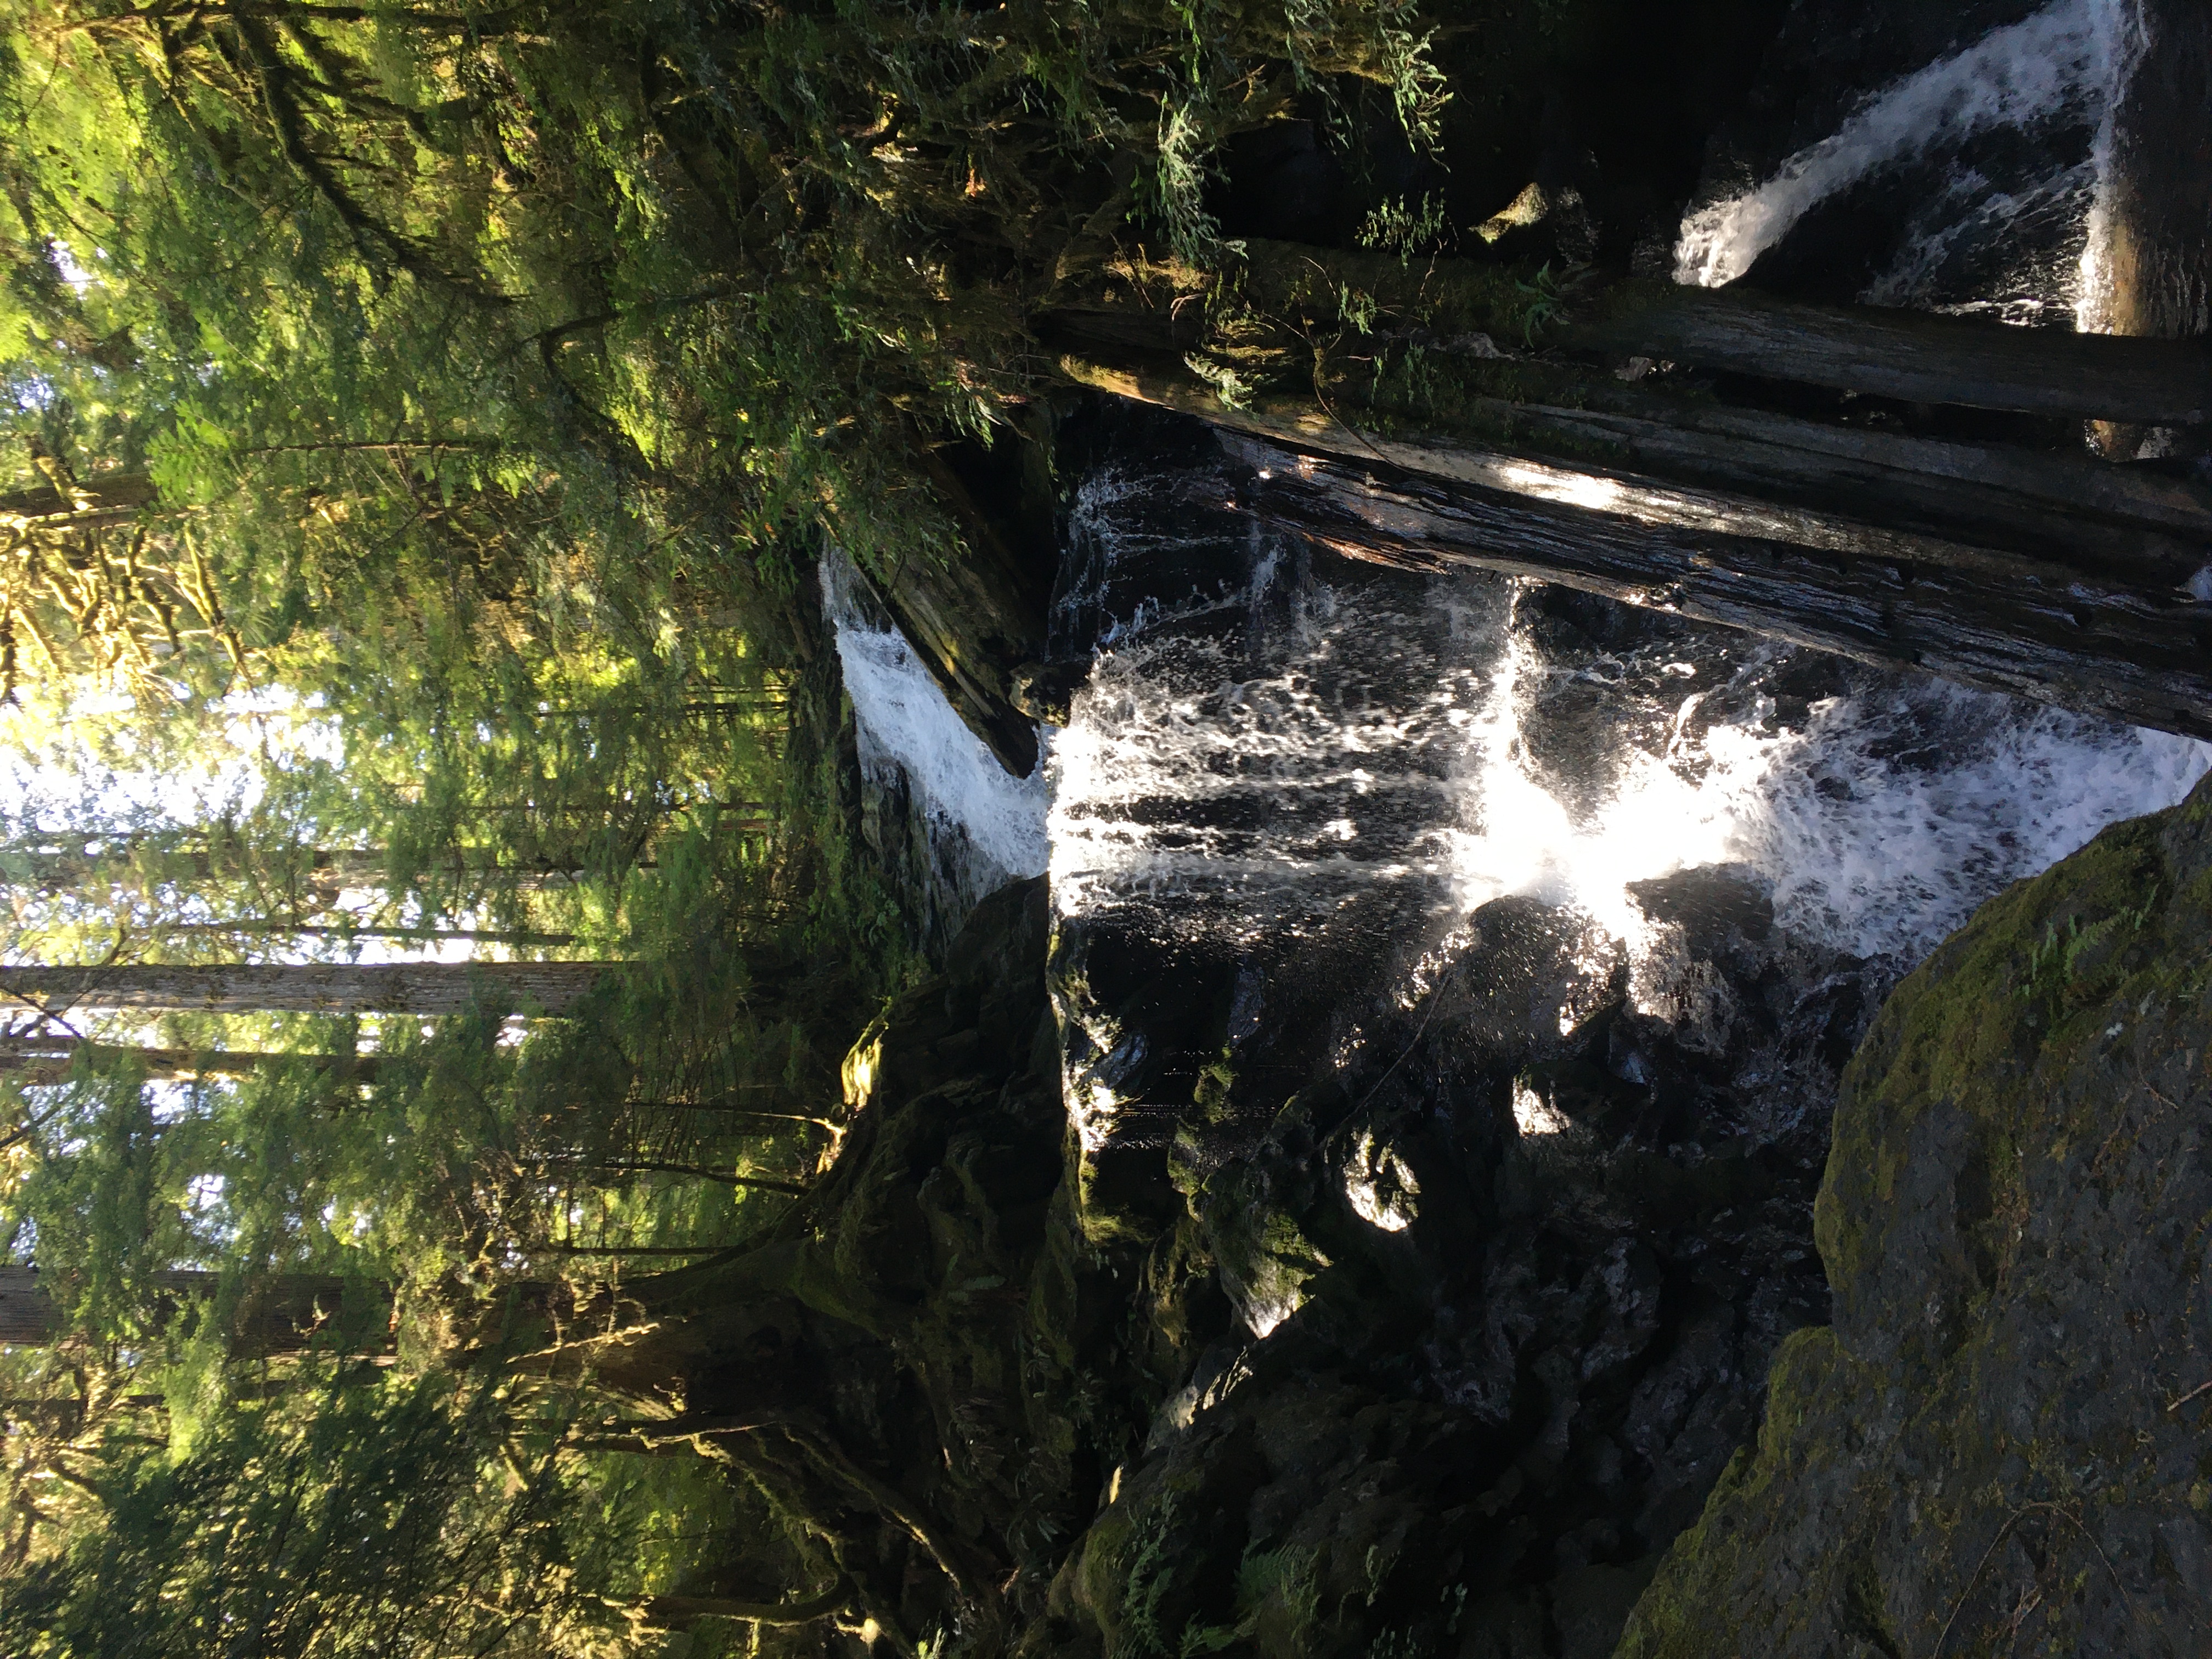 A small waterfall in several stages in a shady forest